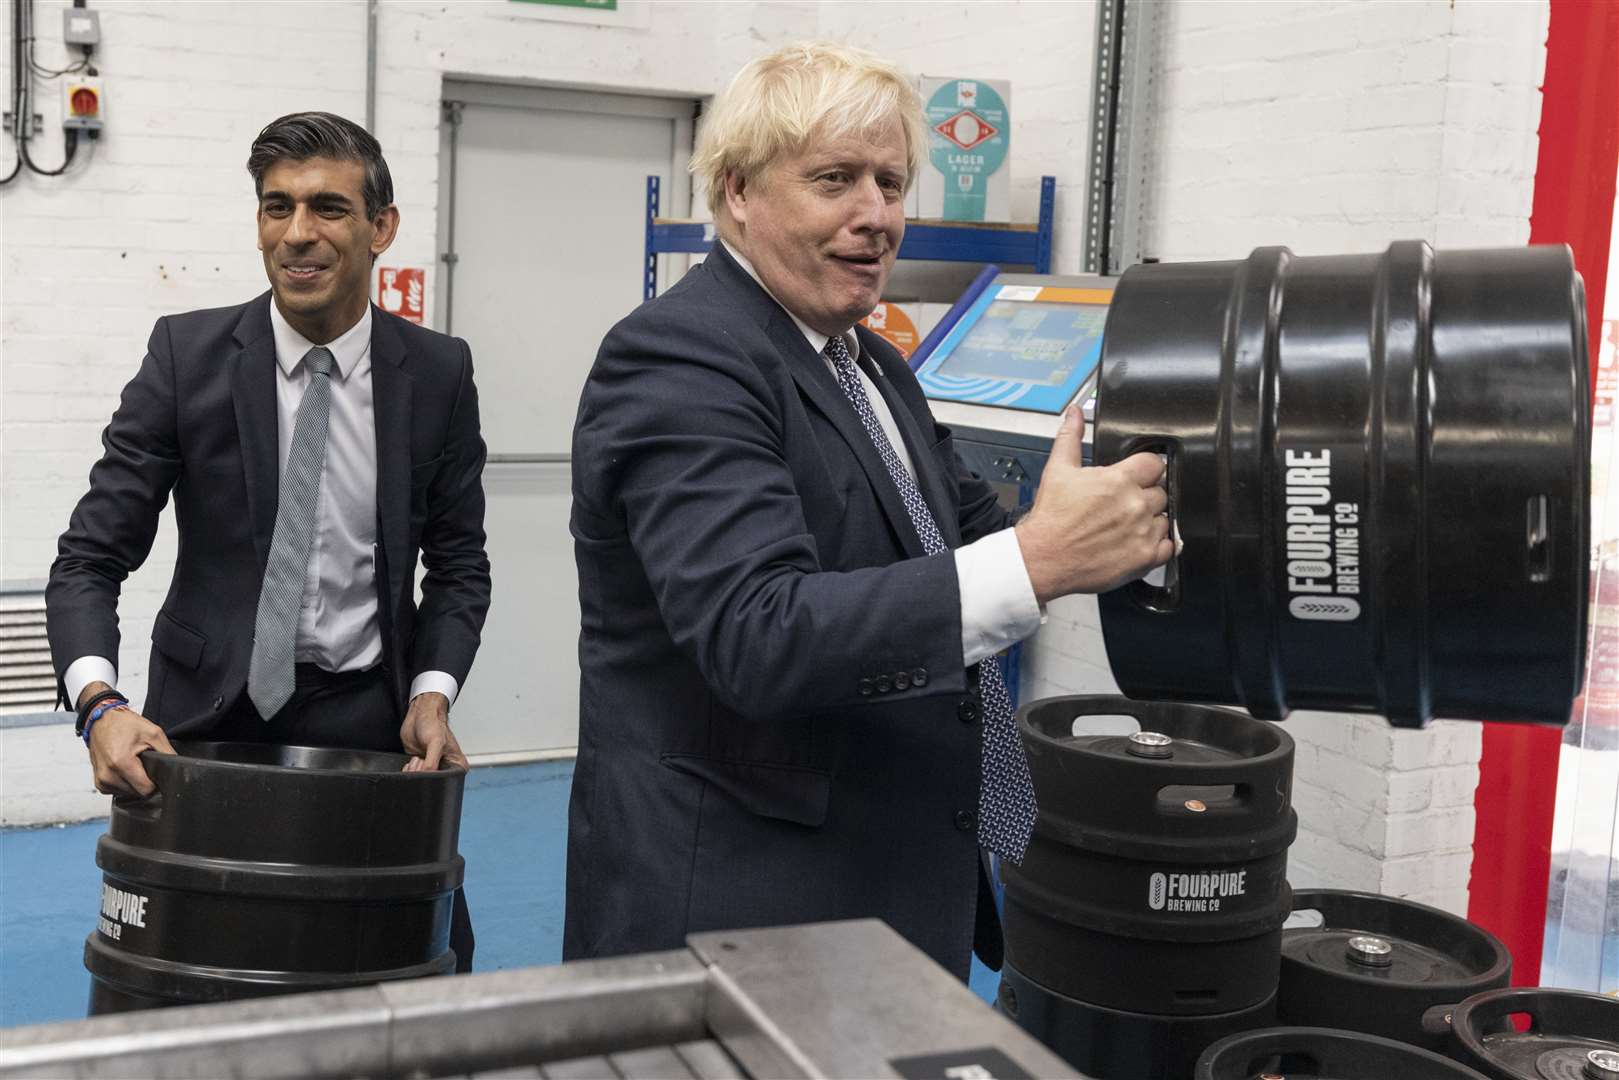 Rishi Sunak could face questions about Boris Johnson’s resignation after his tech speech (Dan Kitwood/PA)